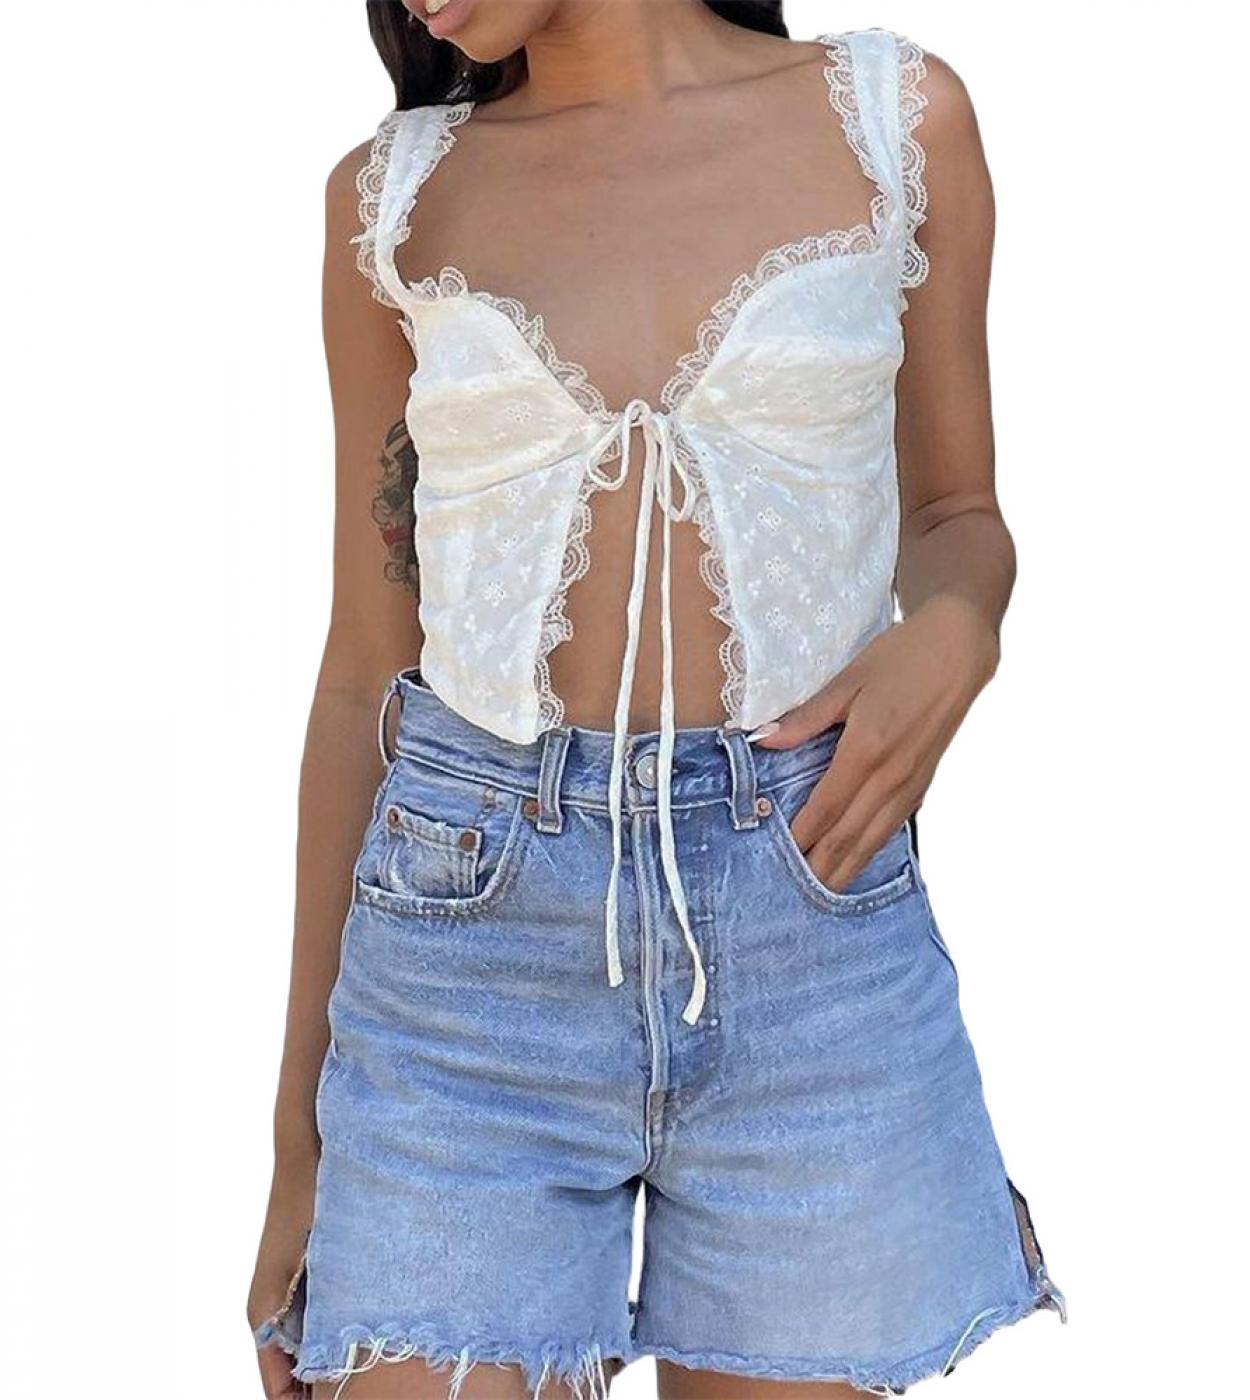 Tetyseysh Women Lace Trim Cropped Camis Low Cut Sleeveless Front Tie Camisole Aesthetic Square Neck Tank Tops Streetwear